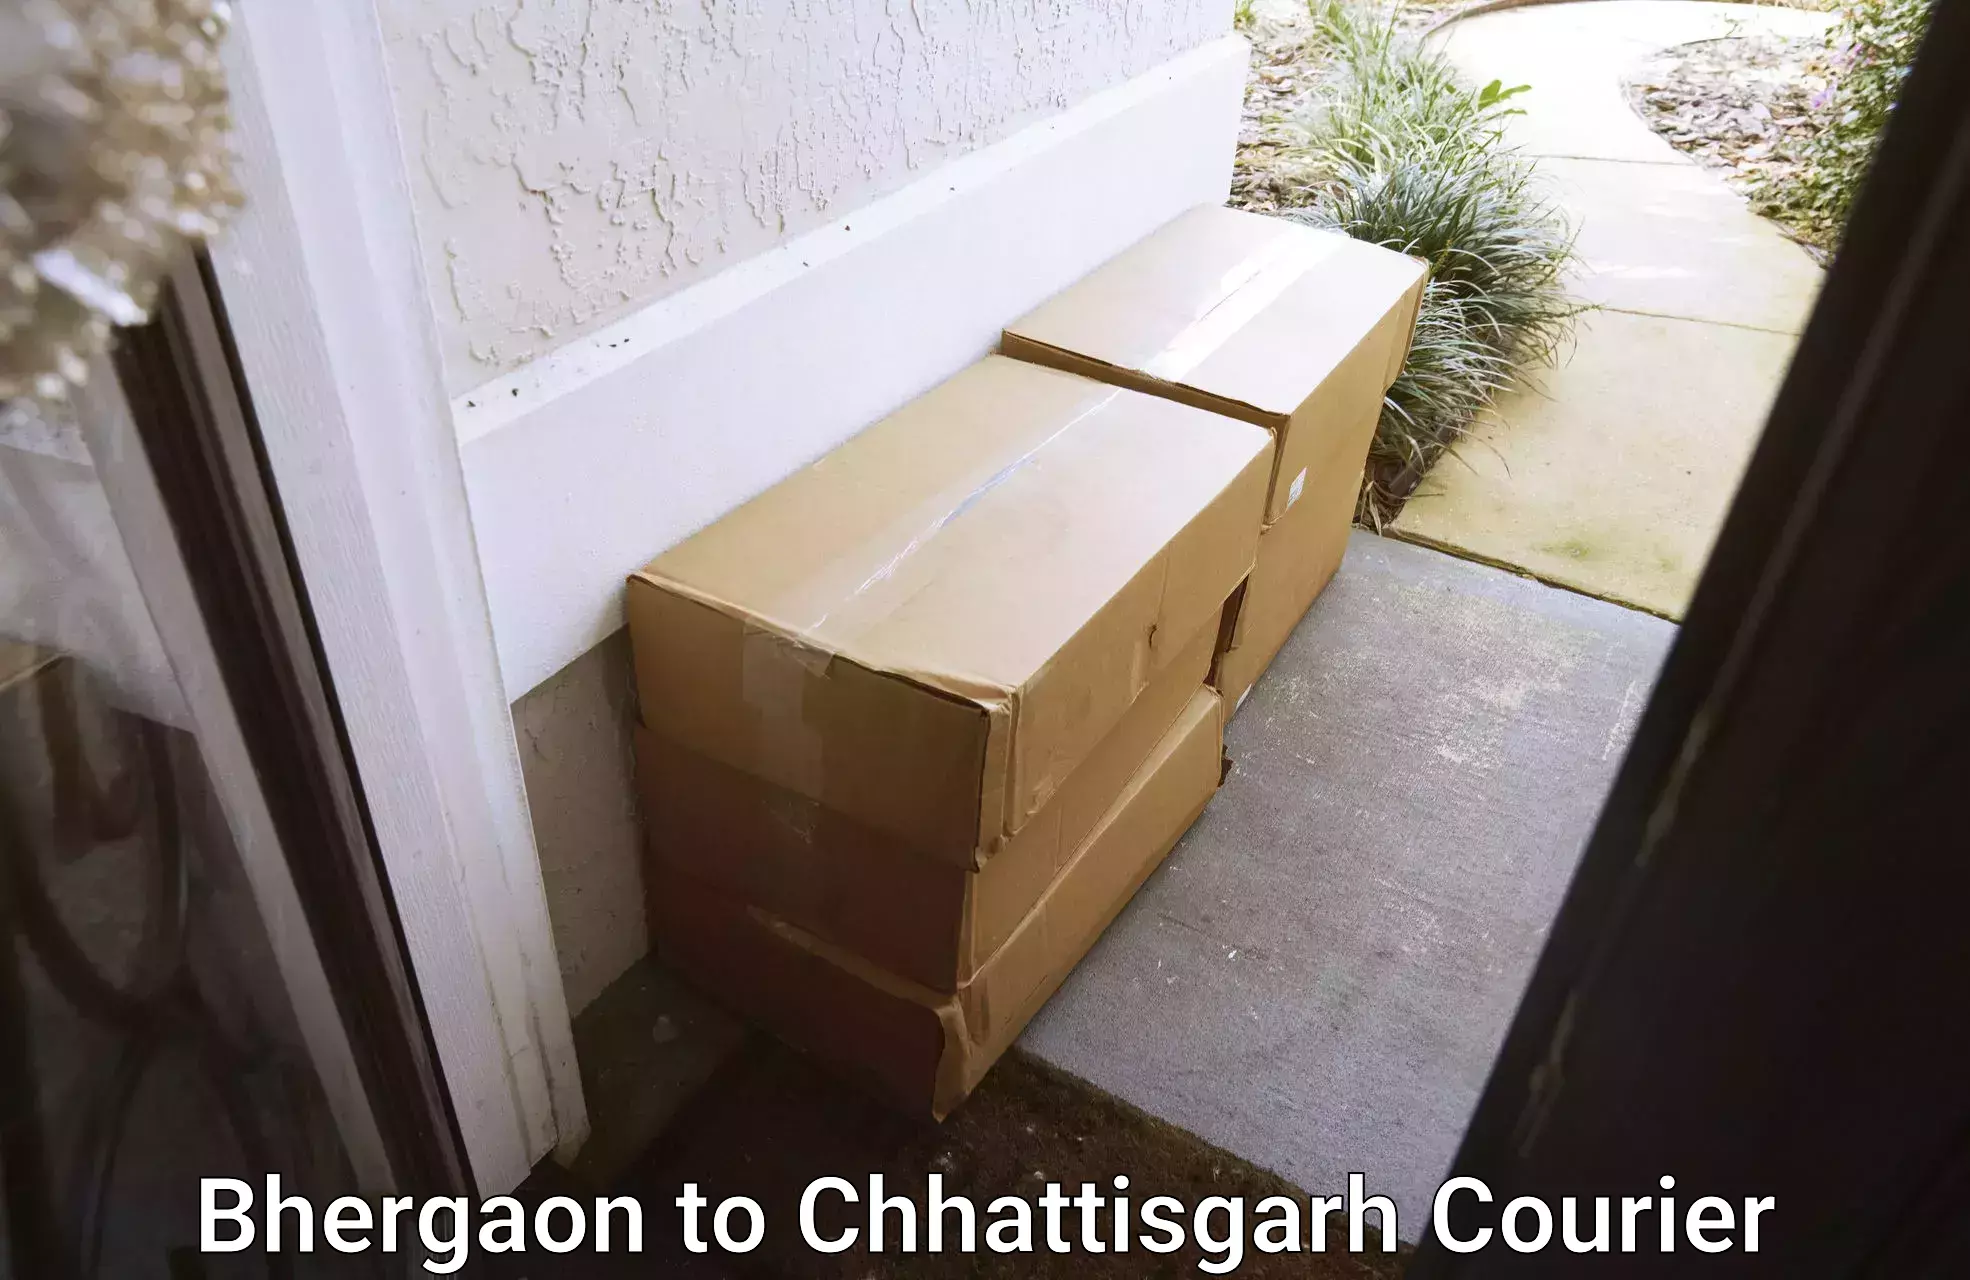 Package delivery network Bhergaon to Dhamtari